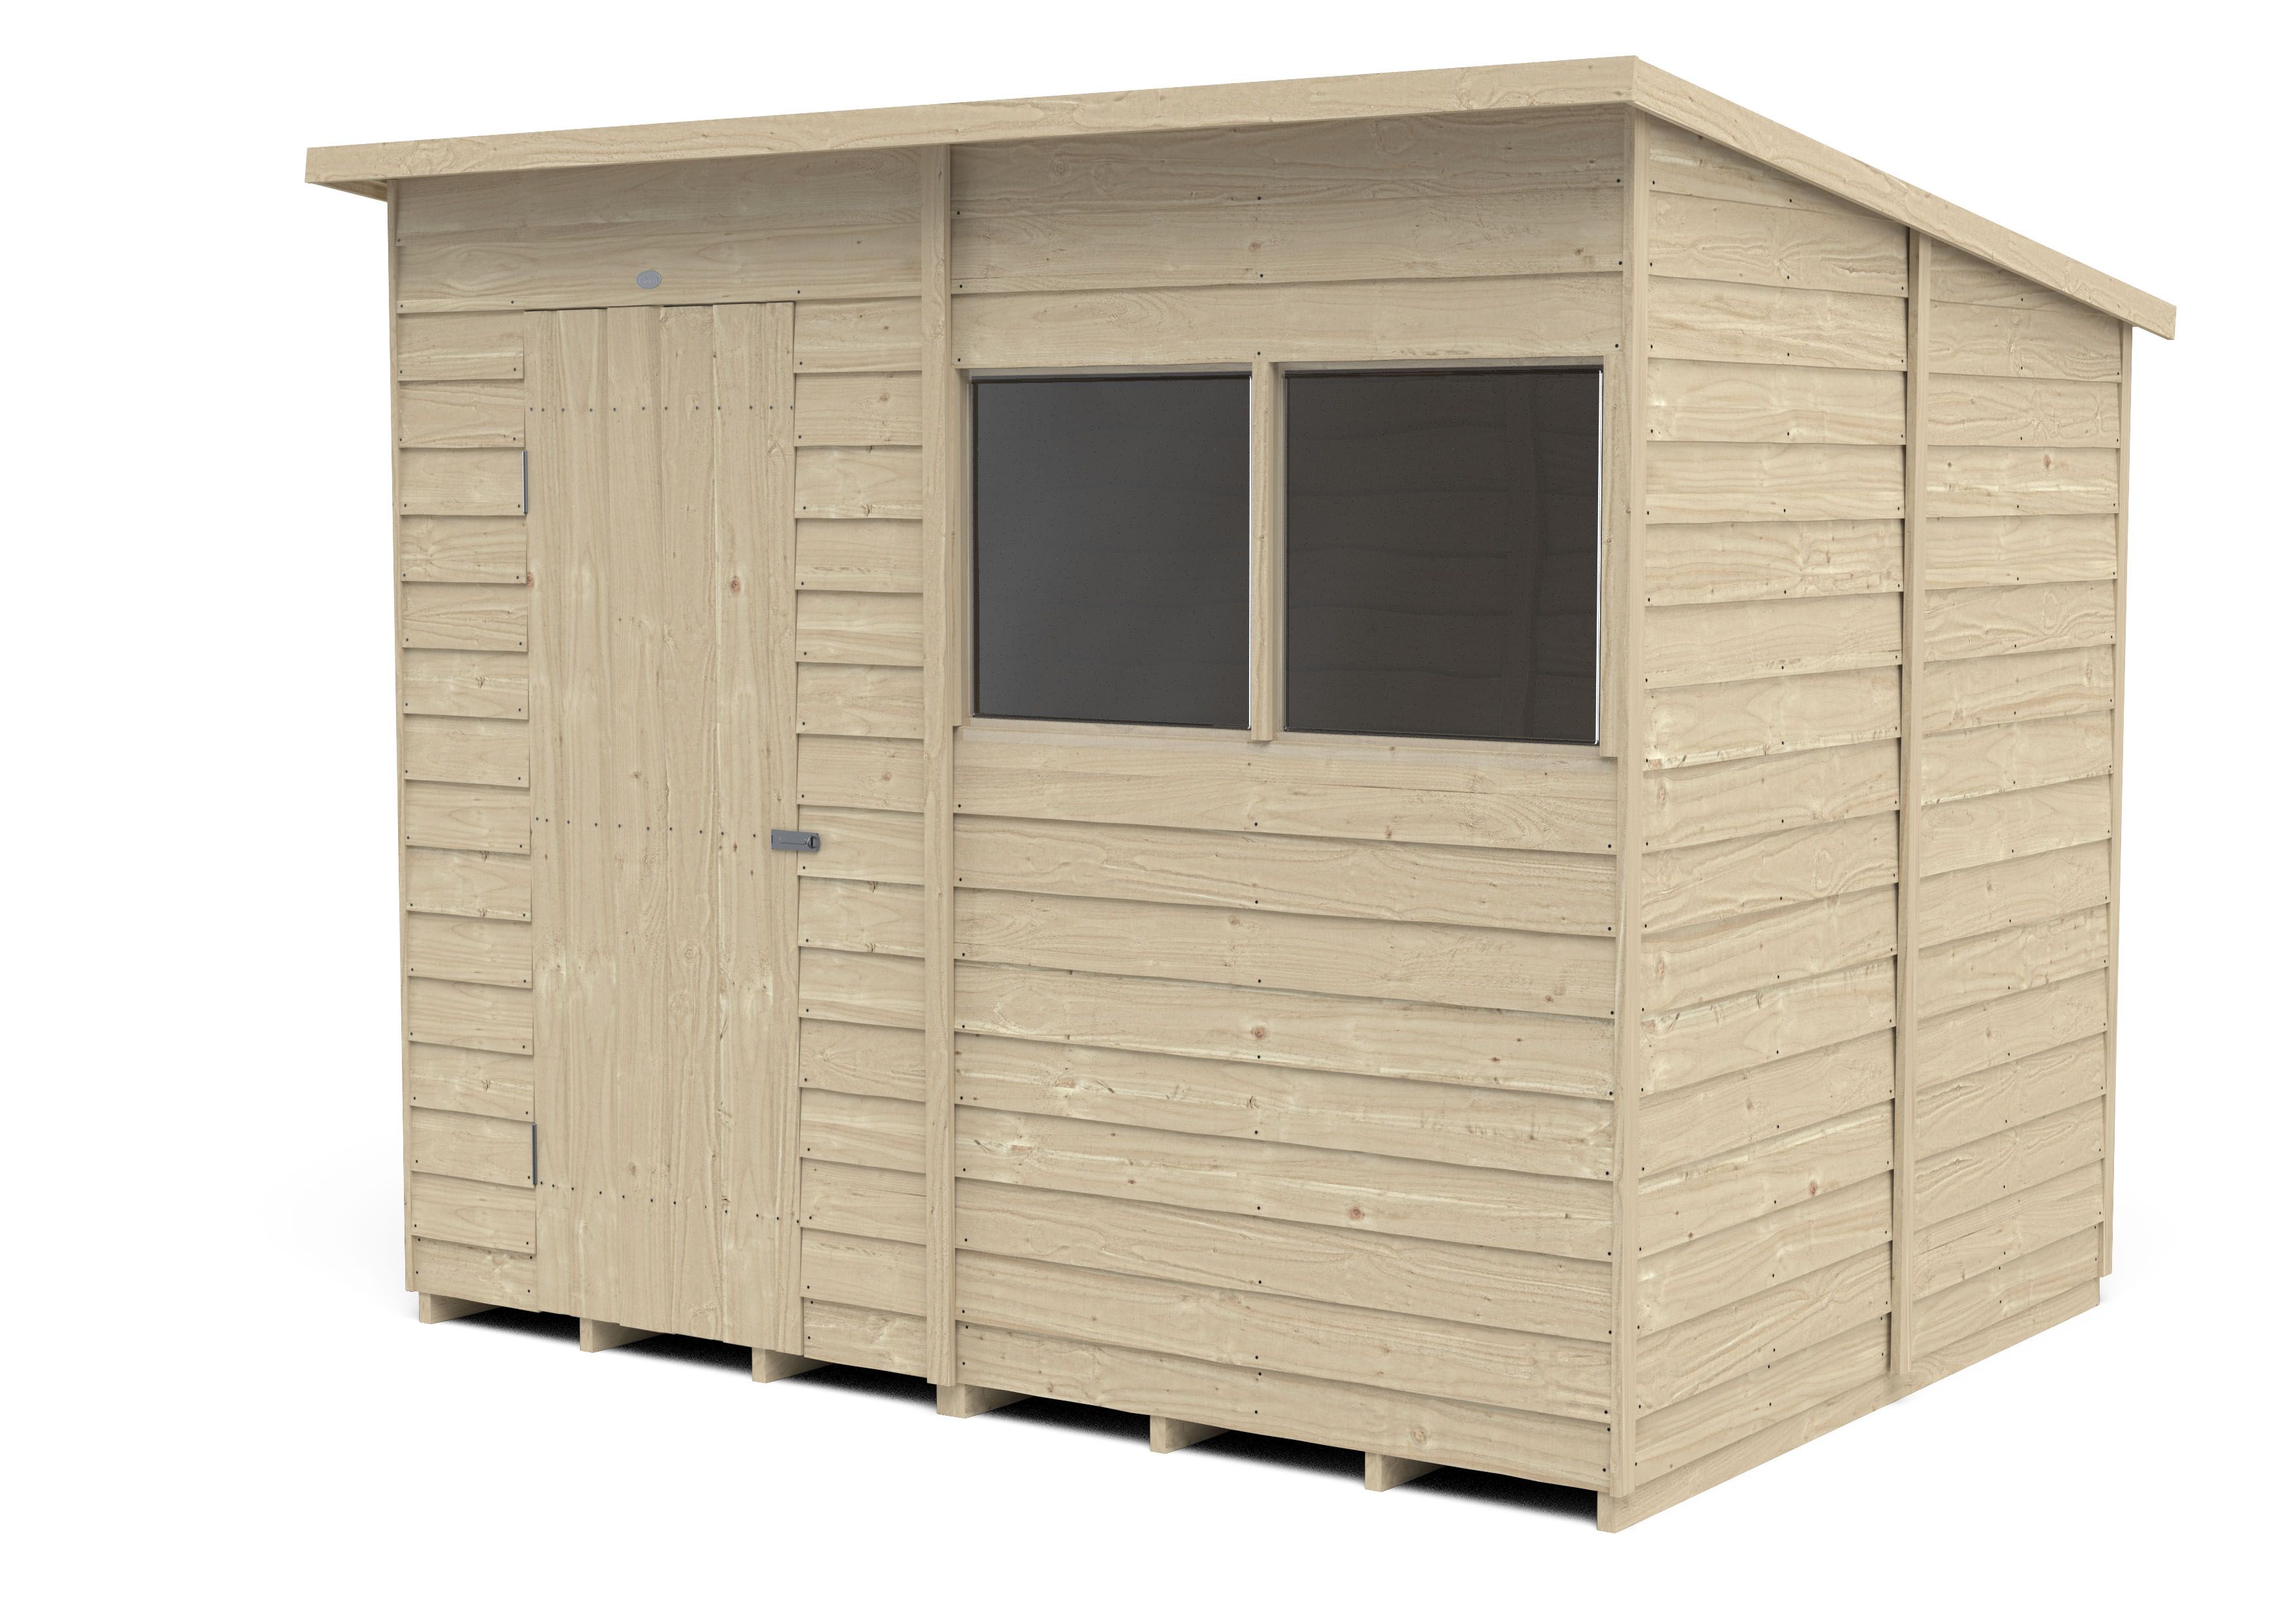 Forest Garden Overlap 8x6 ft Pent Wooden Pressure treated Shed with floor & 2 windows (Base included) - Assembly service included